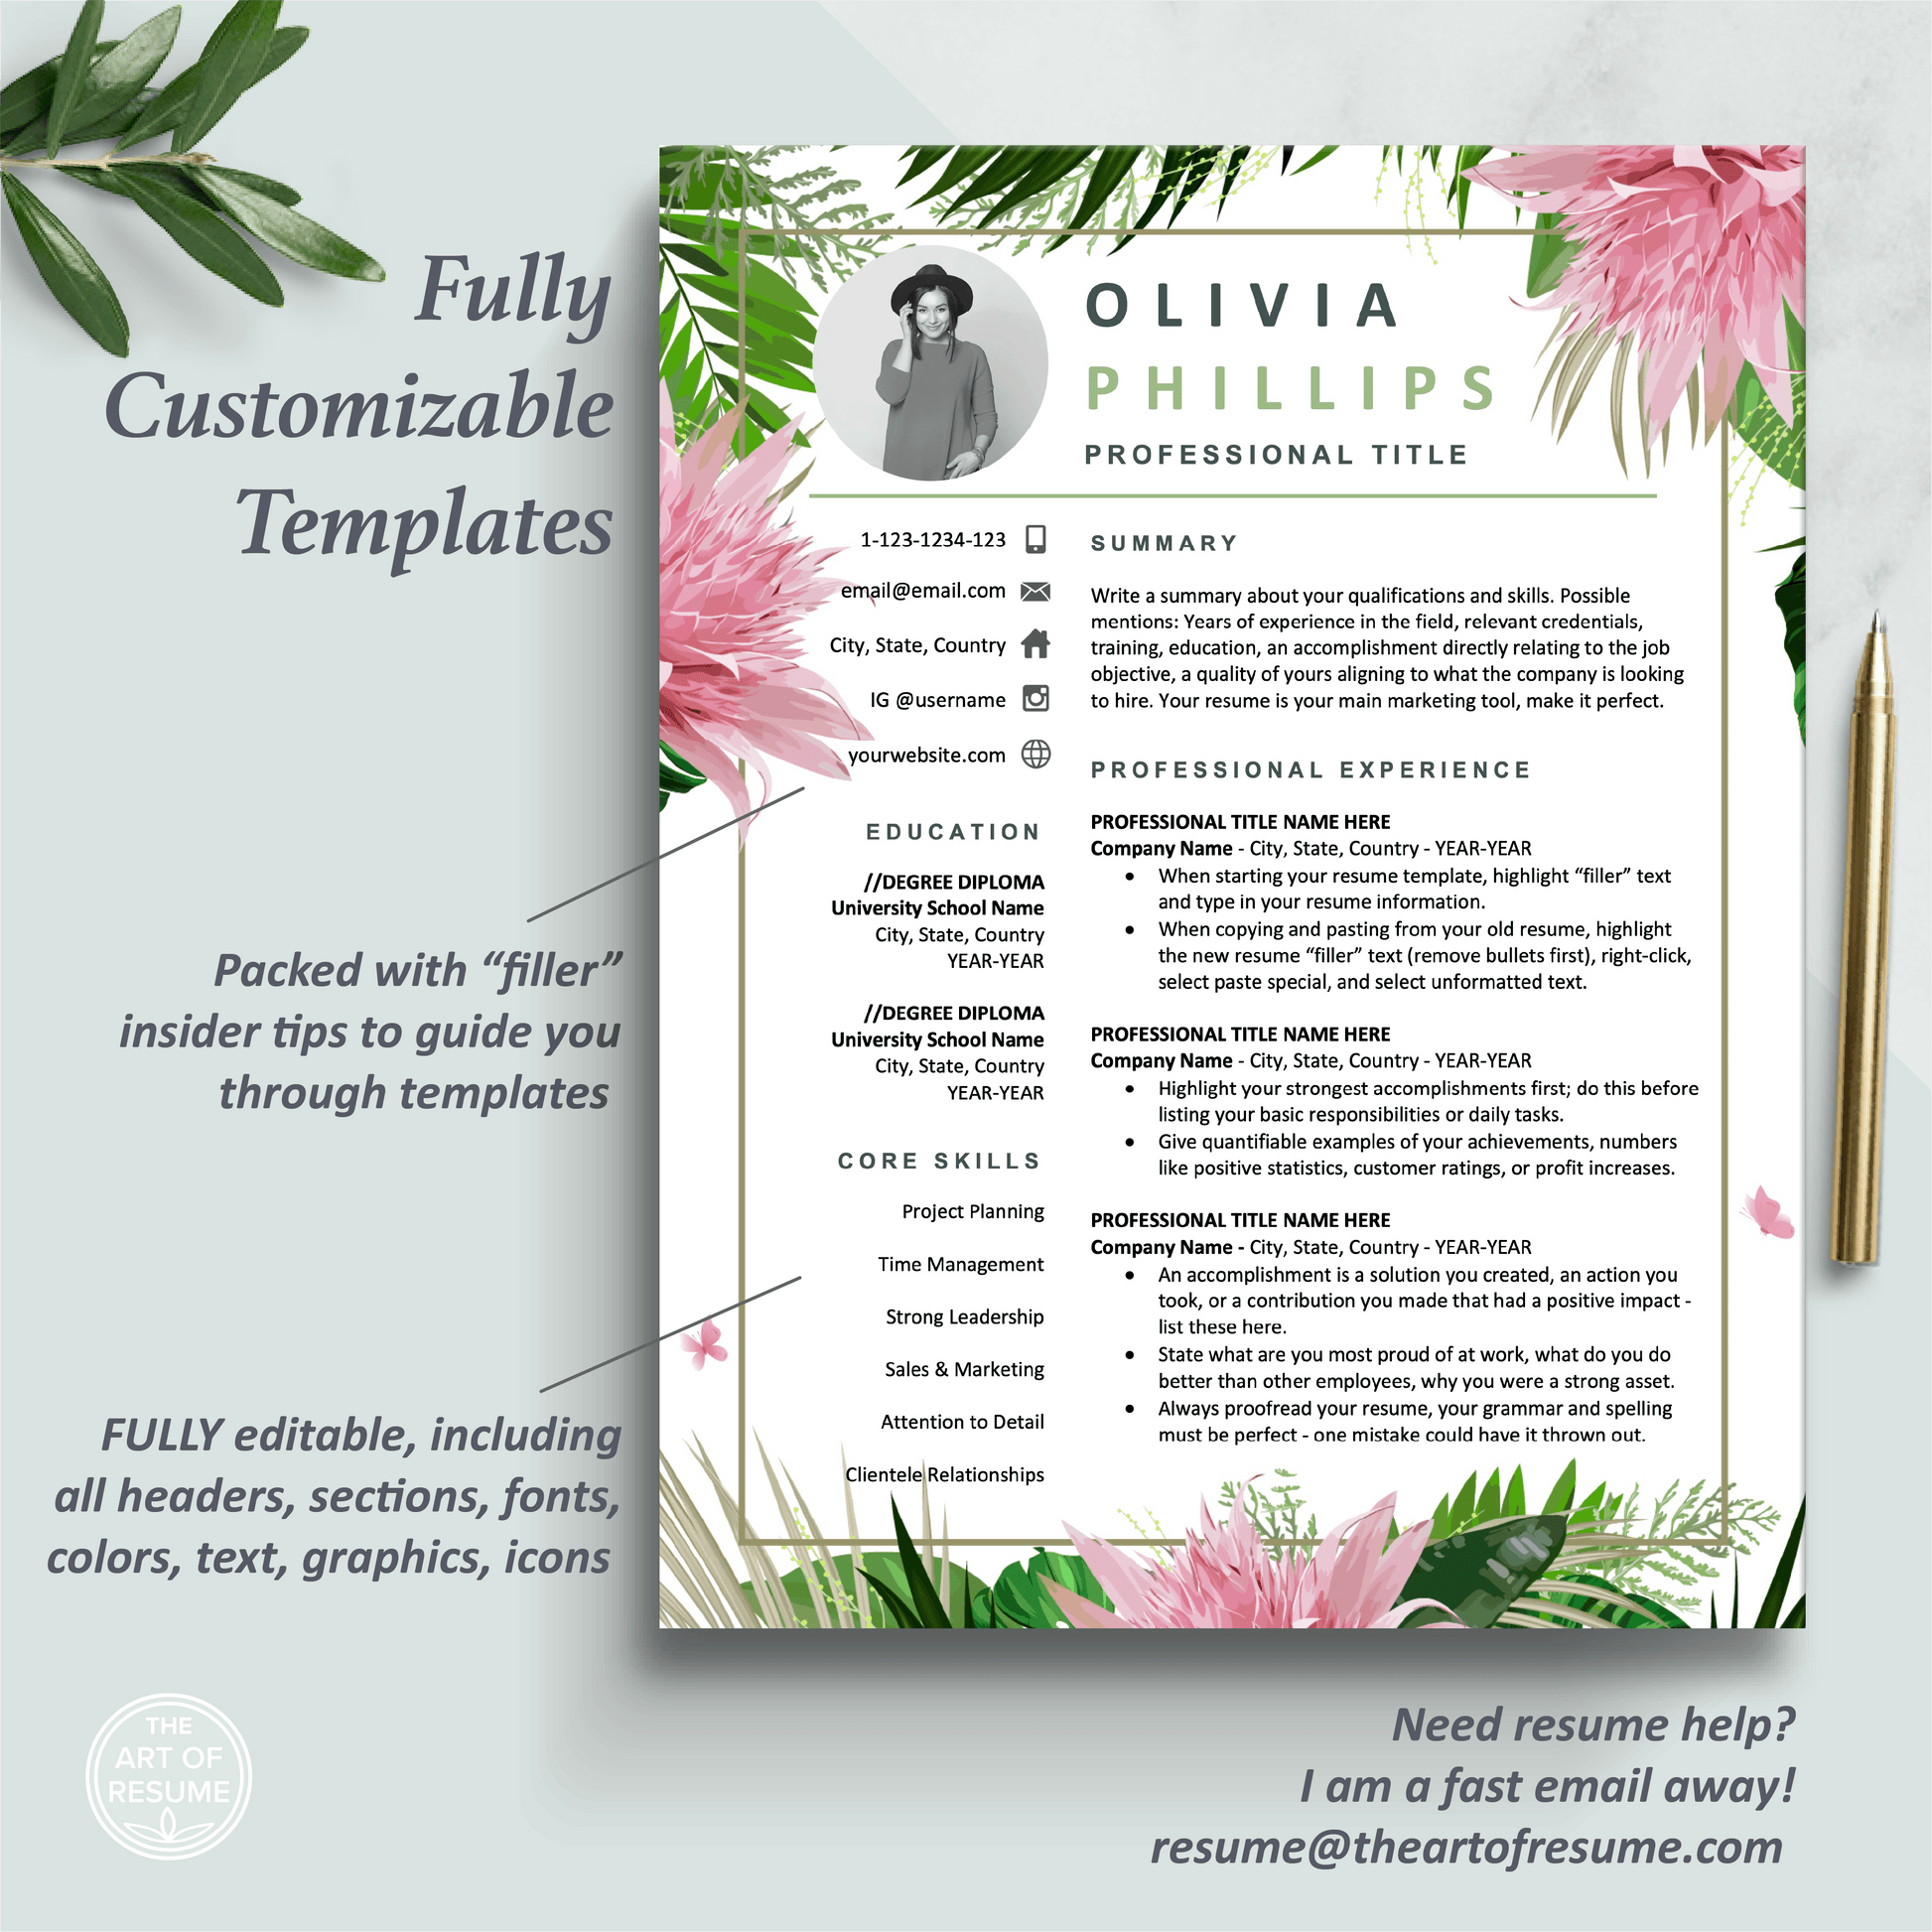 The Art of Resume Templates | One-Page Creative Pink Floral Resume CV Design Template Maker | Curriculum Vitae